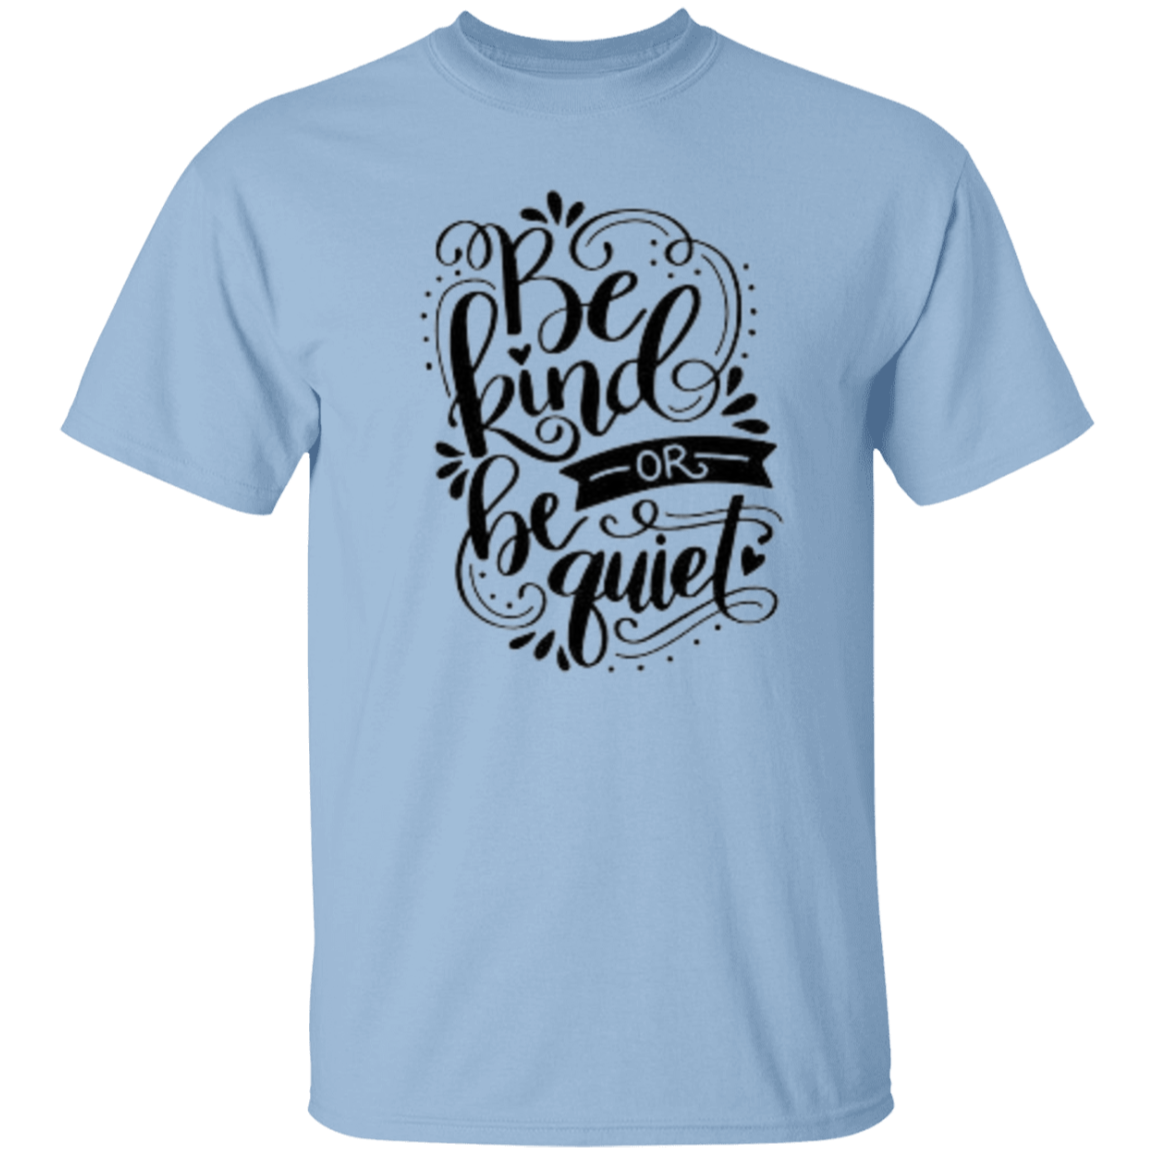 Be Kind Or Be Quiet T-Shirt, Kindness Shirt, Inspirational Shirt, Kind Shirt, Be Kind Shirt, Spread Kindness Shirt, Motivational Shirt, Shirts For Women